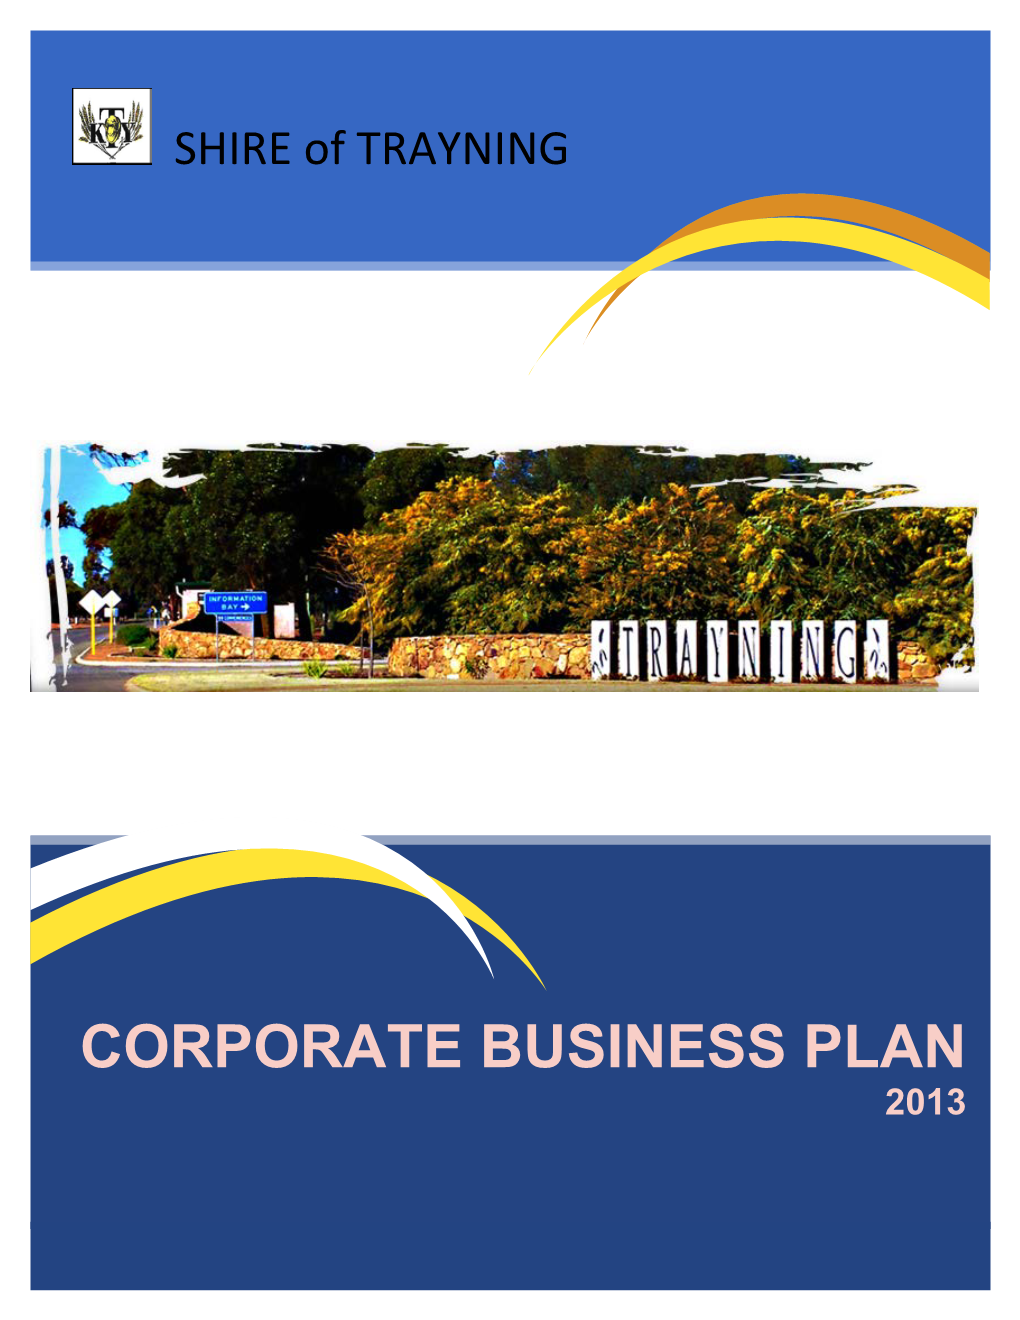 2013 Shire of Trayning Corporate Business Plan